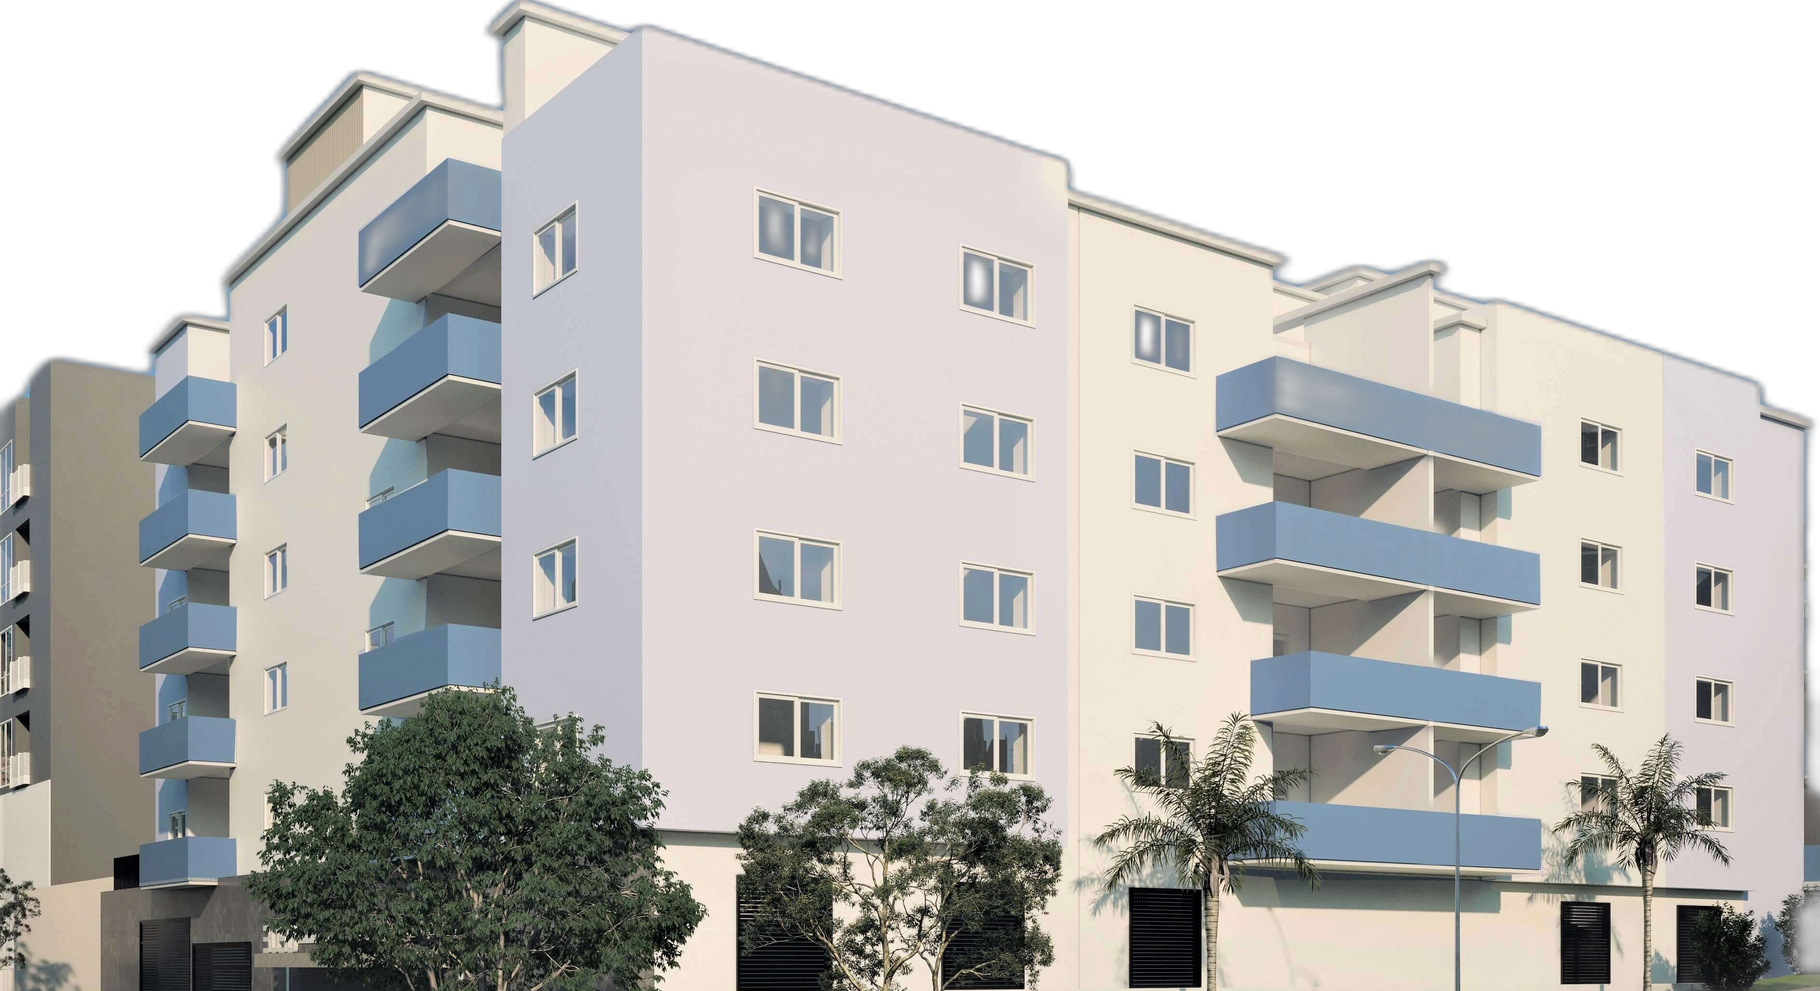 photo of an architectural rendering of The Hobart Apartments facade